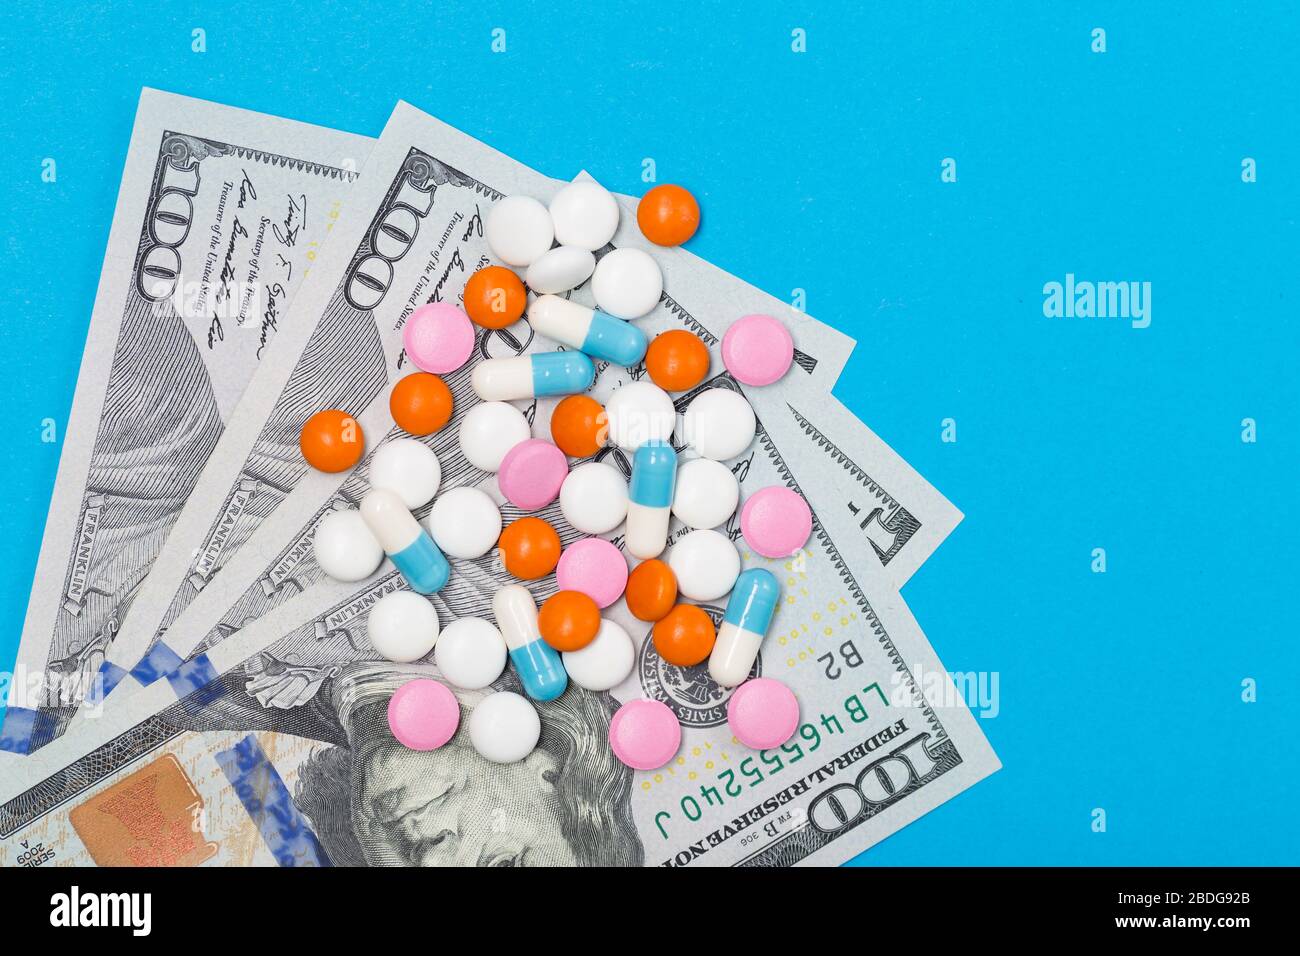 Medicine pills, tablets and capsules on US dollars background. Free space. Healthcare concept Stock Photo